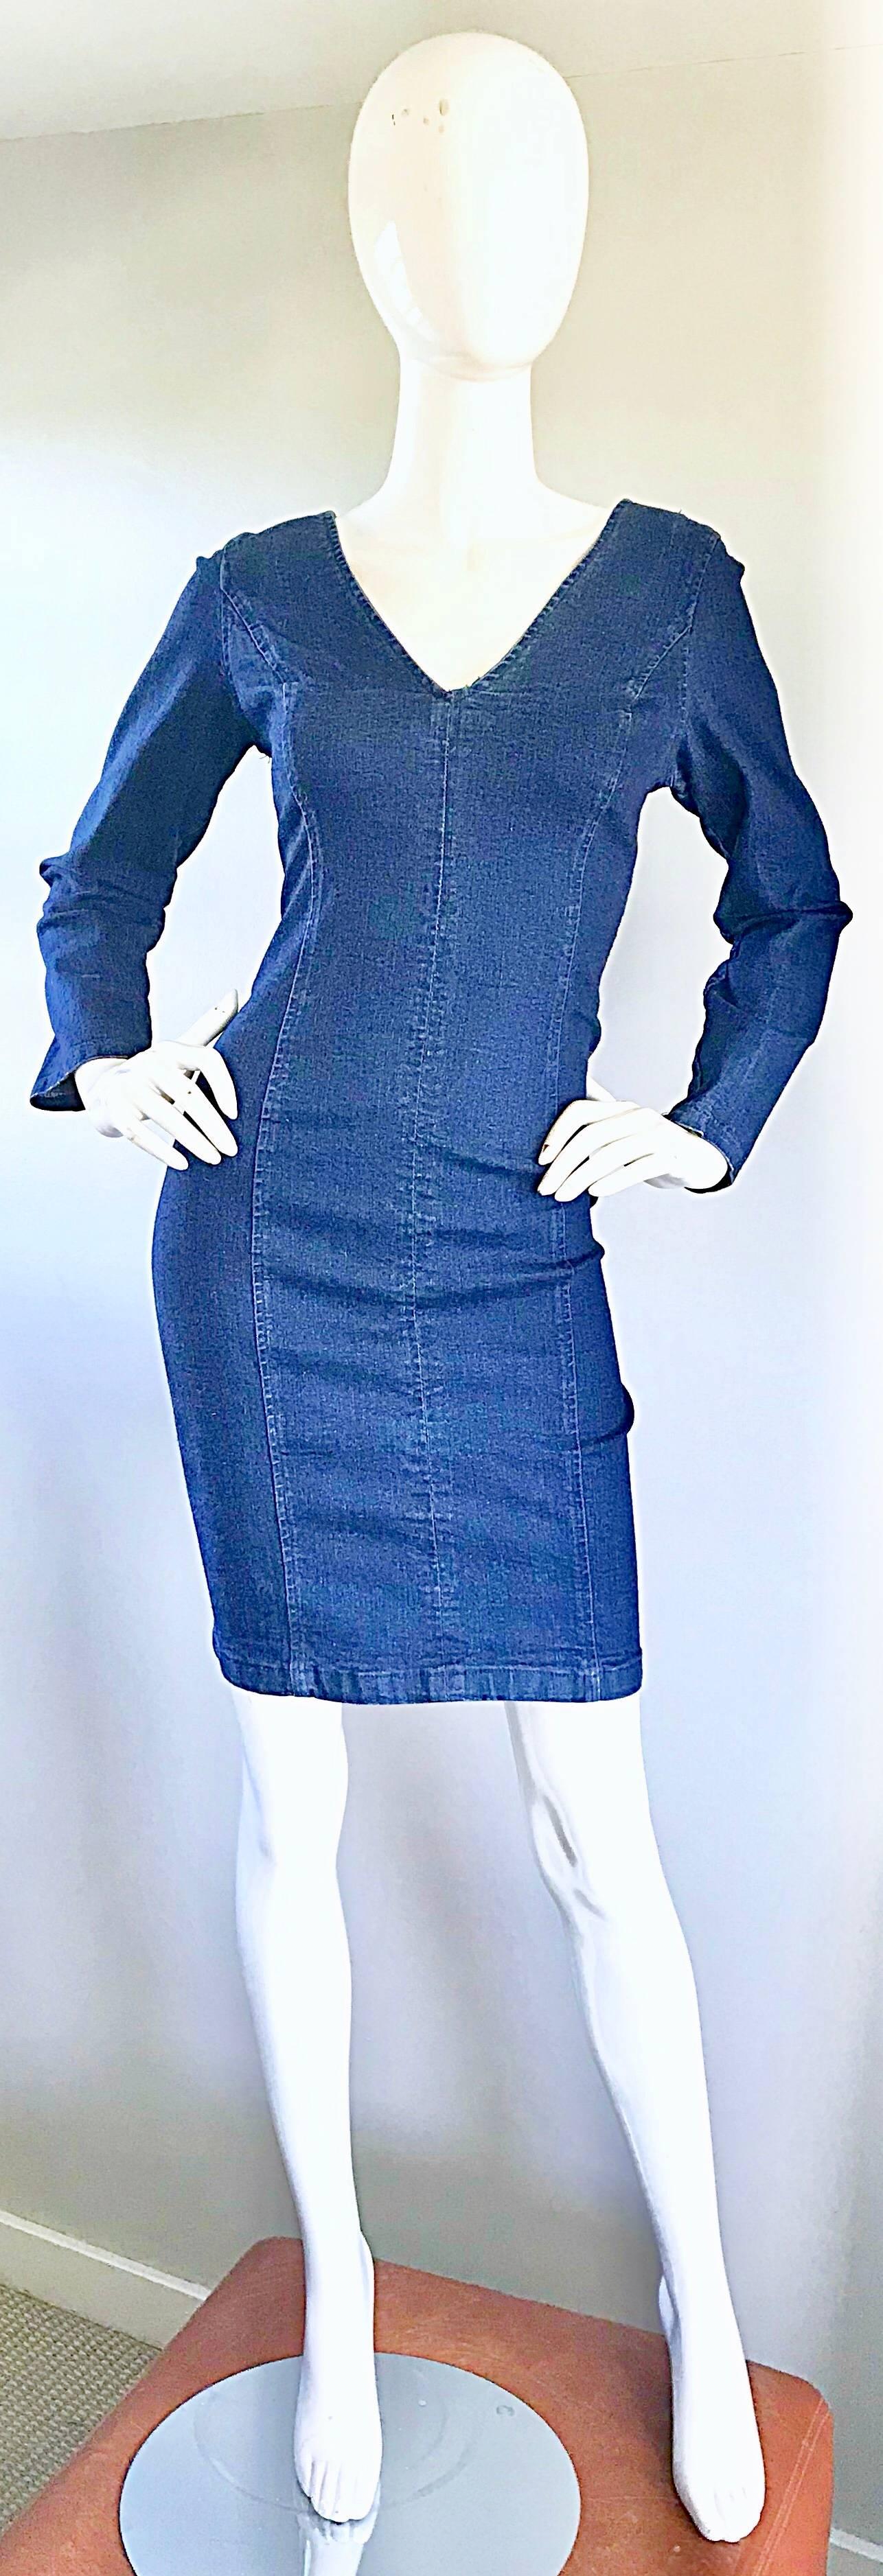 Sexy 1990s dark wash denim blue jean long sleeve bodcon dress! Features a form fitting cotton (98%) and lycra (2%) denim that offers some stretch. Hugs the body in all the right places. Full metal zipper up the back. Great belted or alone with